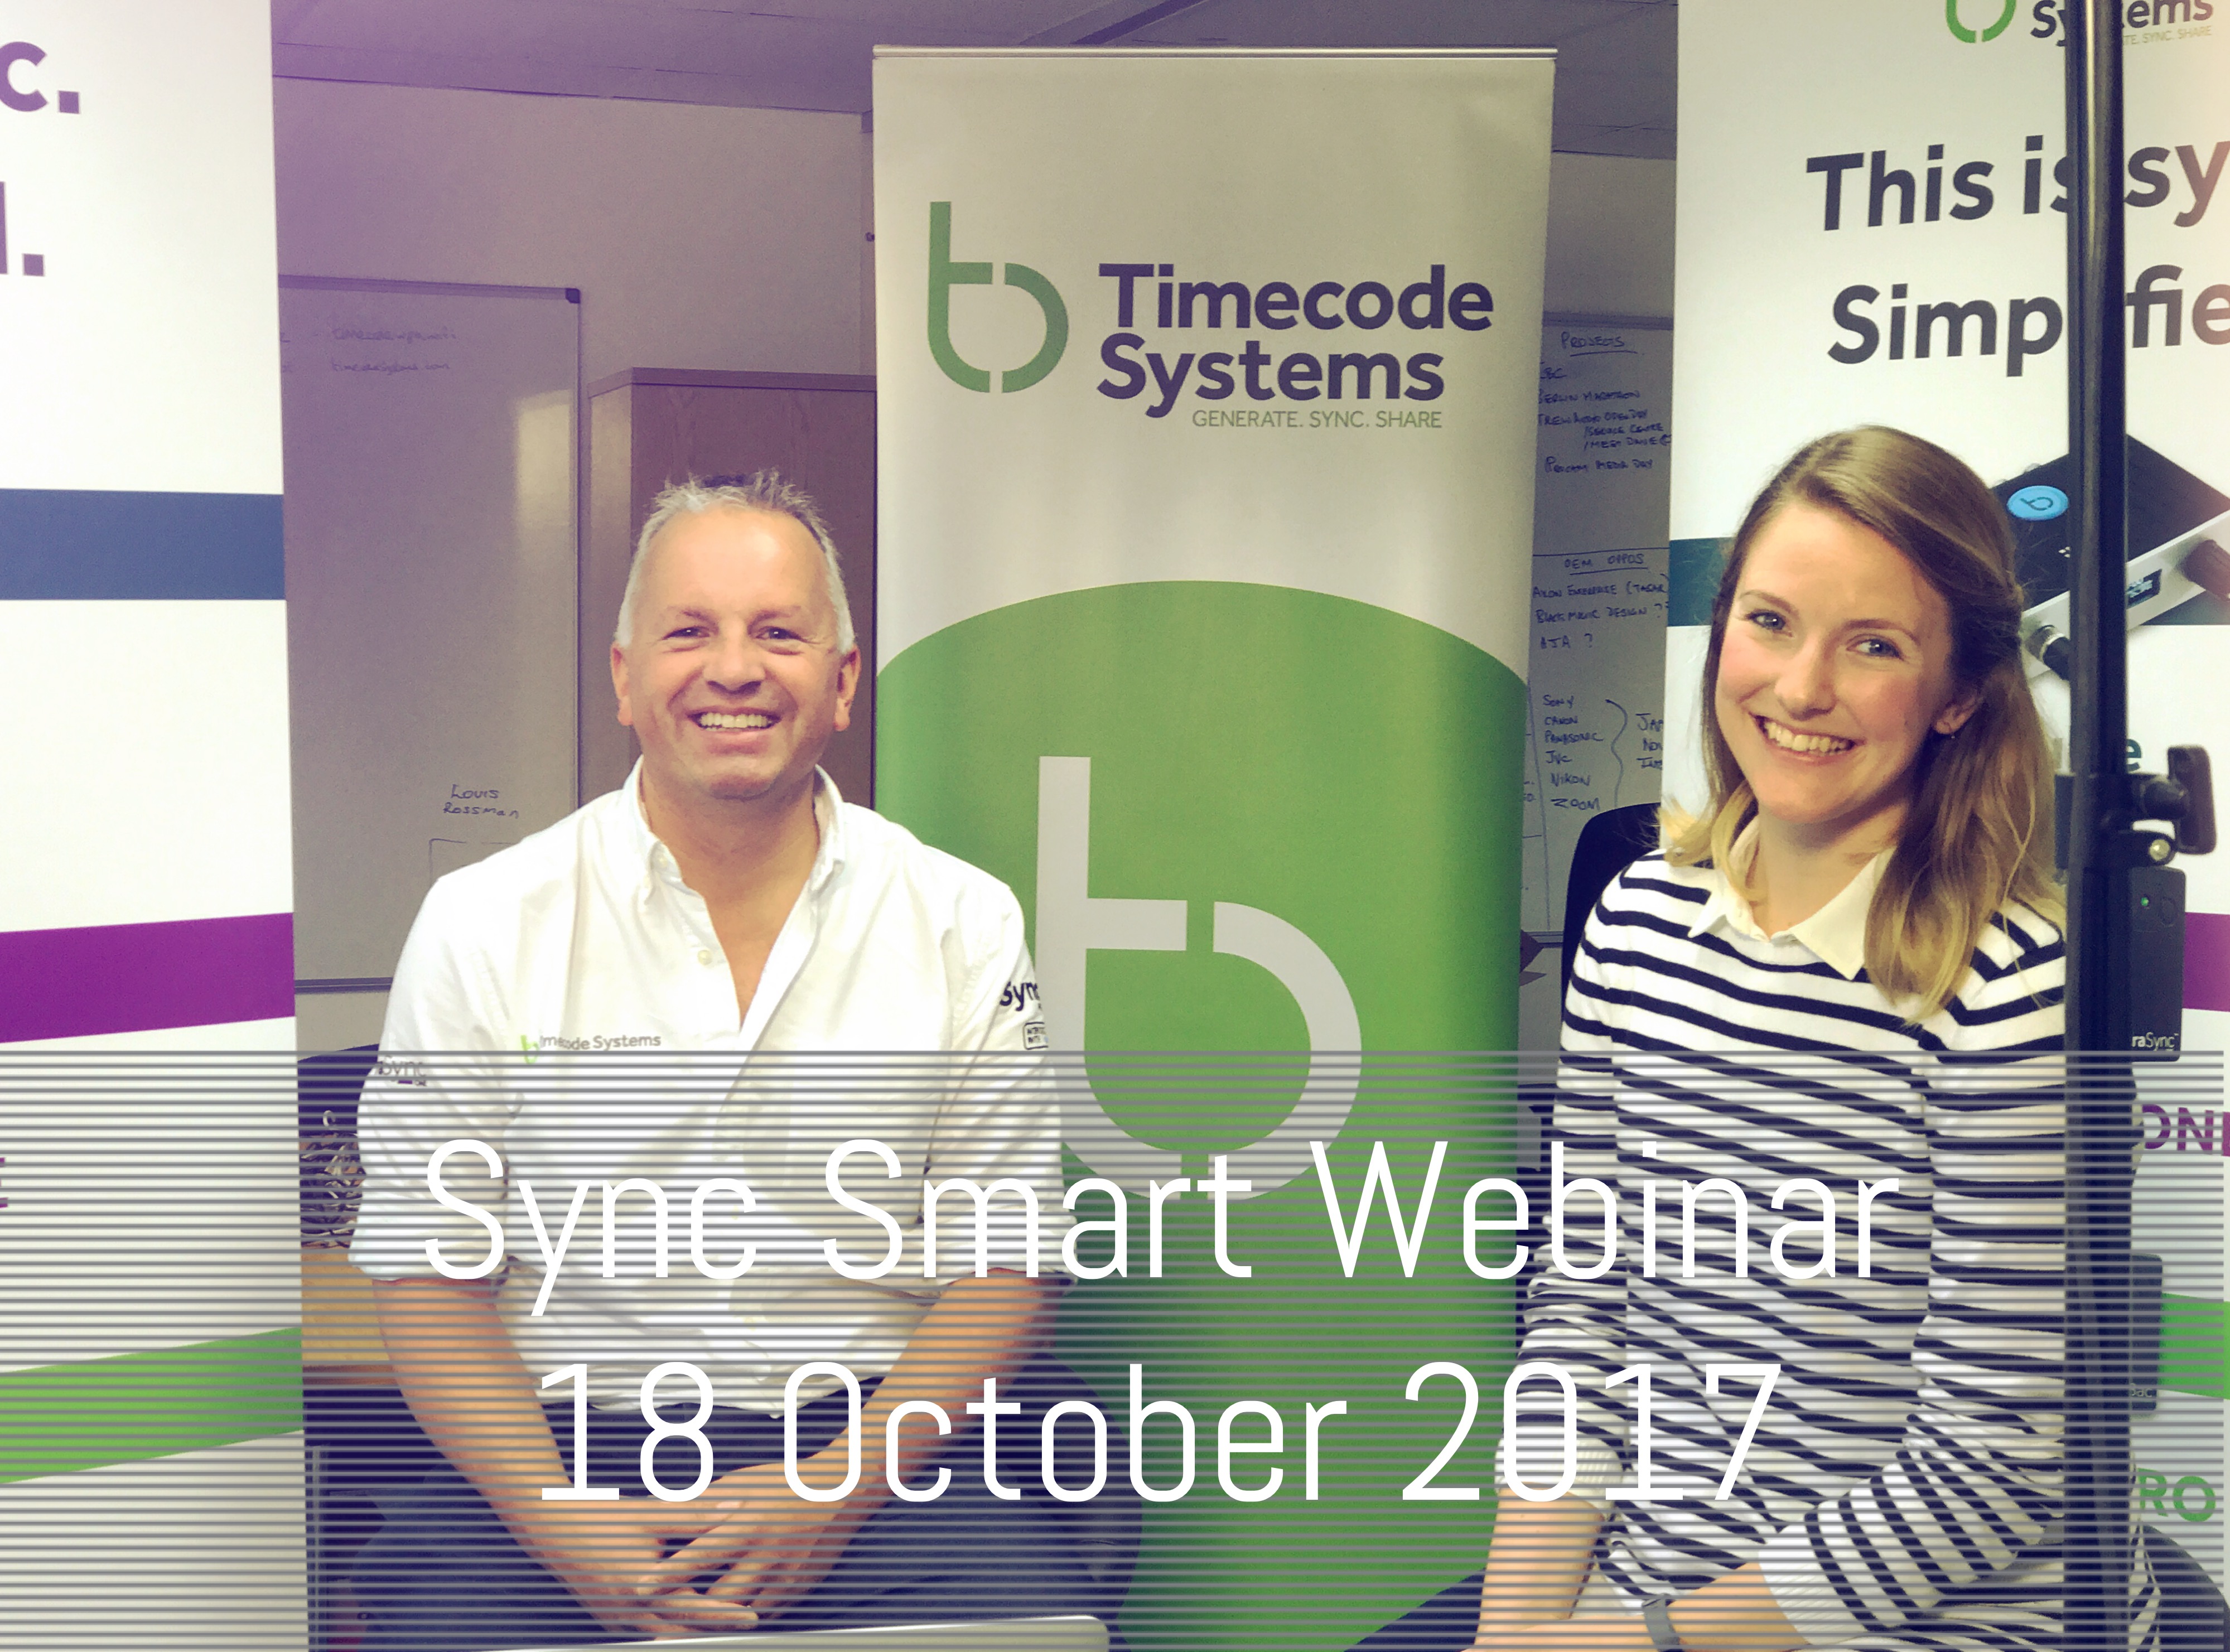 Register to join our Sync Smart webinar